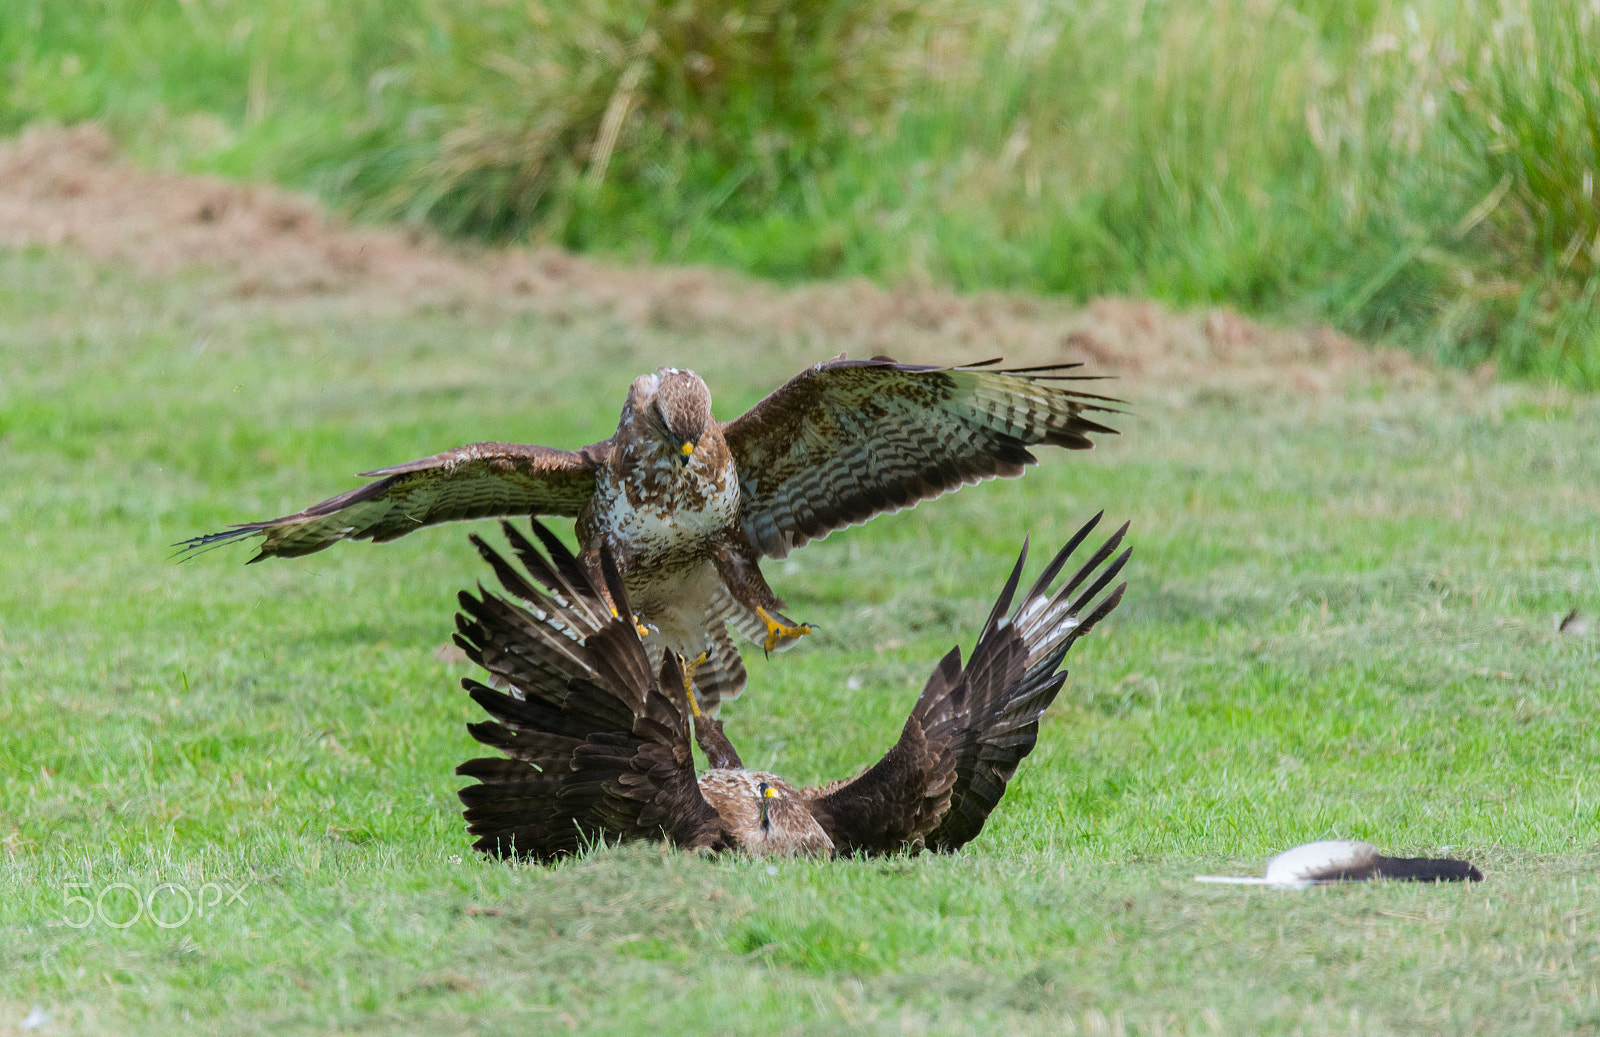 Nikon D610 + Sigma 150-600mm F5-6.3 DG OS HSM | S sample photo. Two buzzards and a feather photography